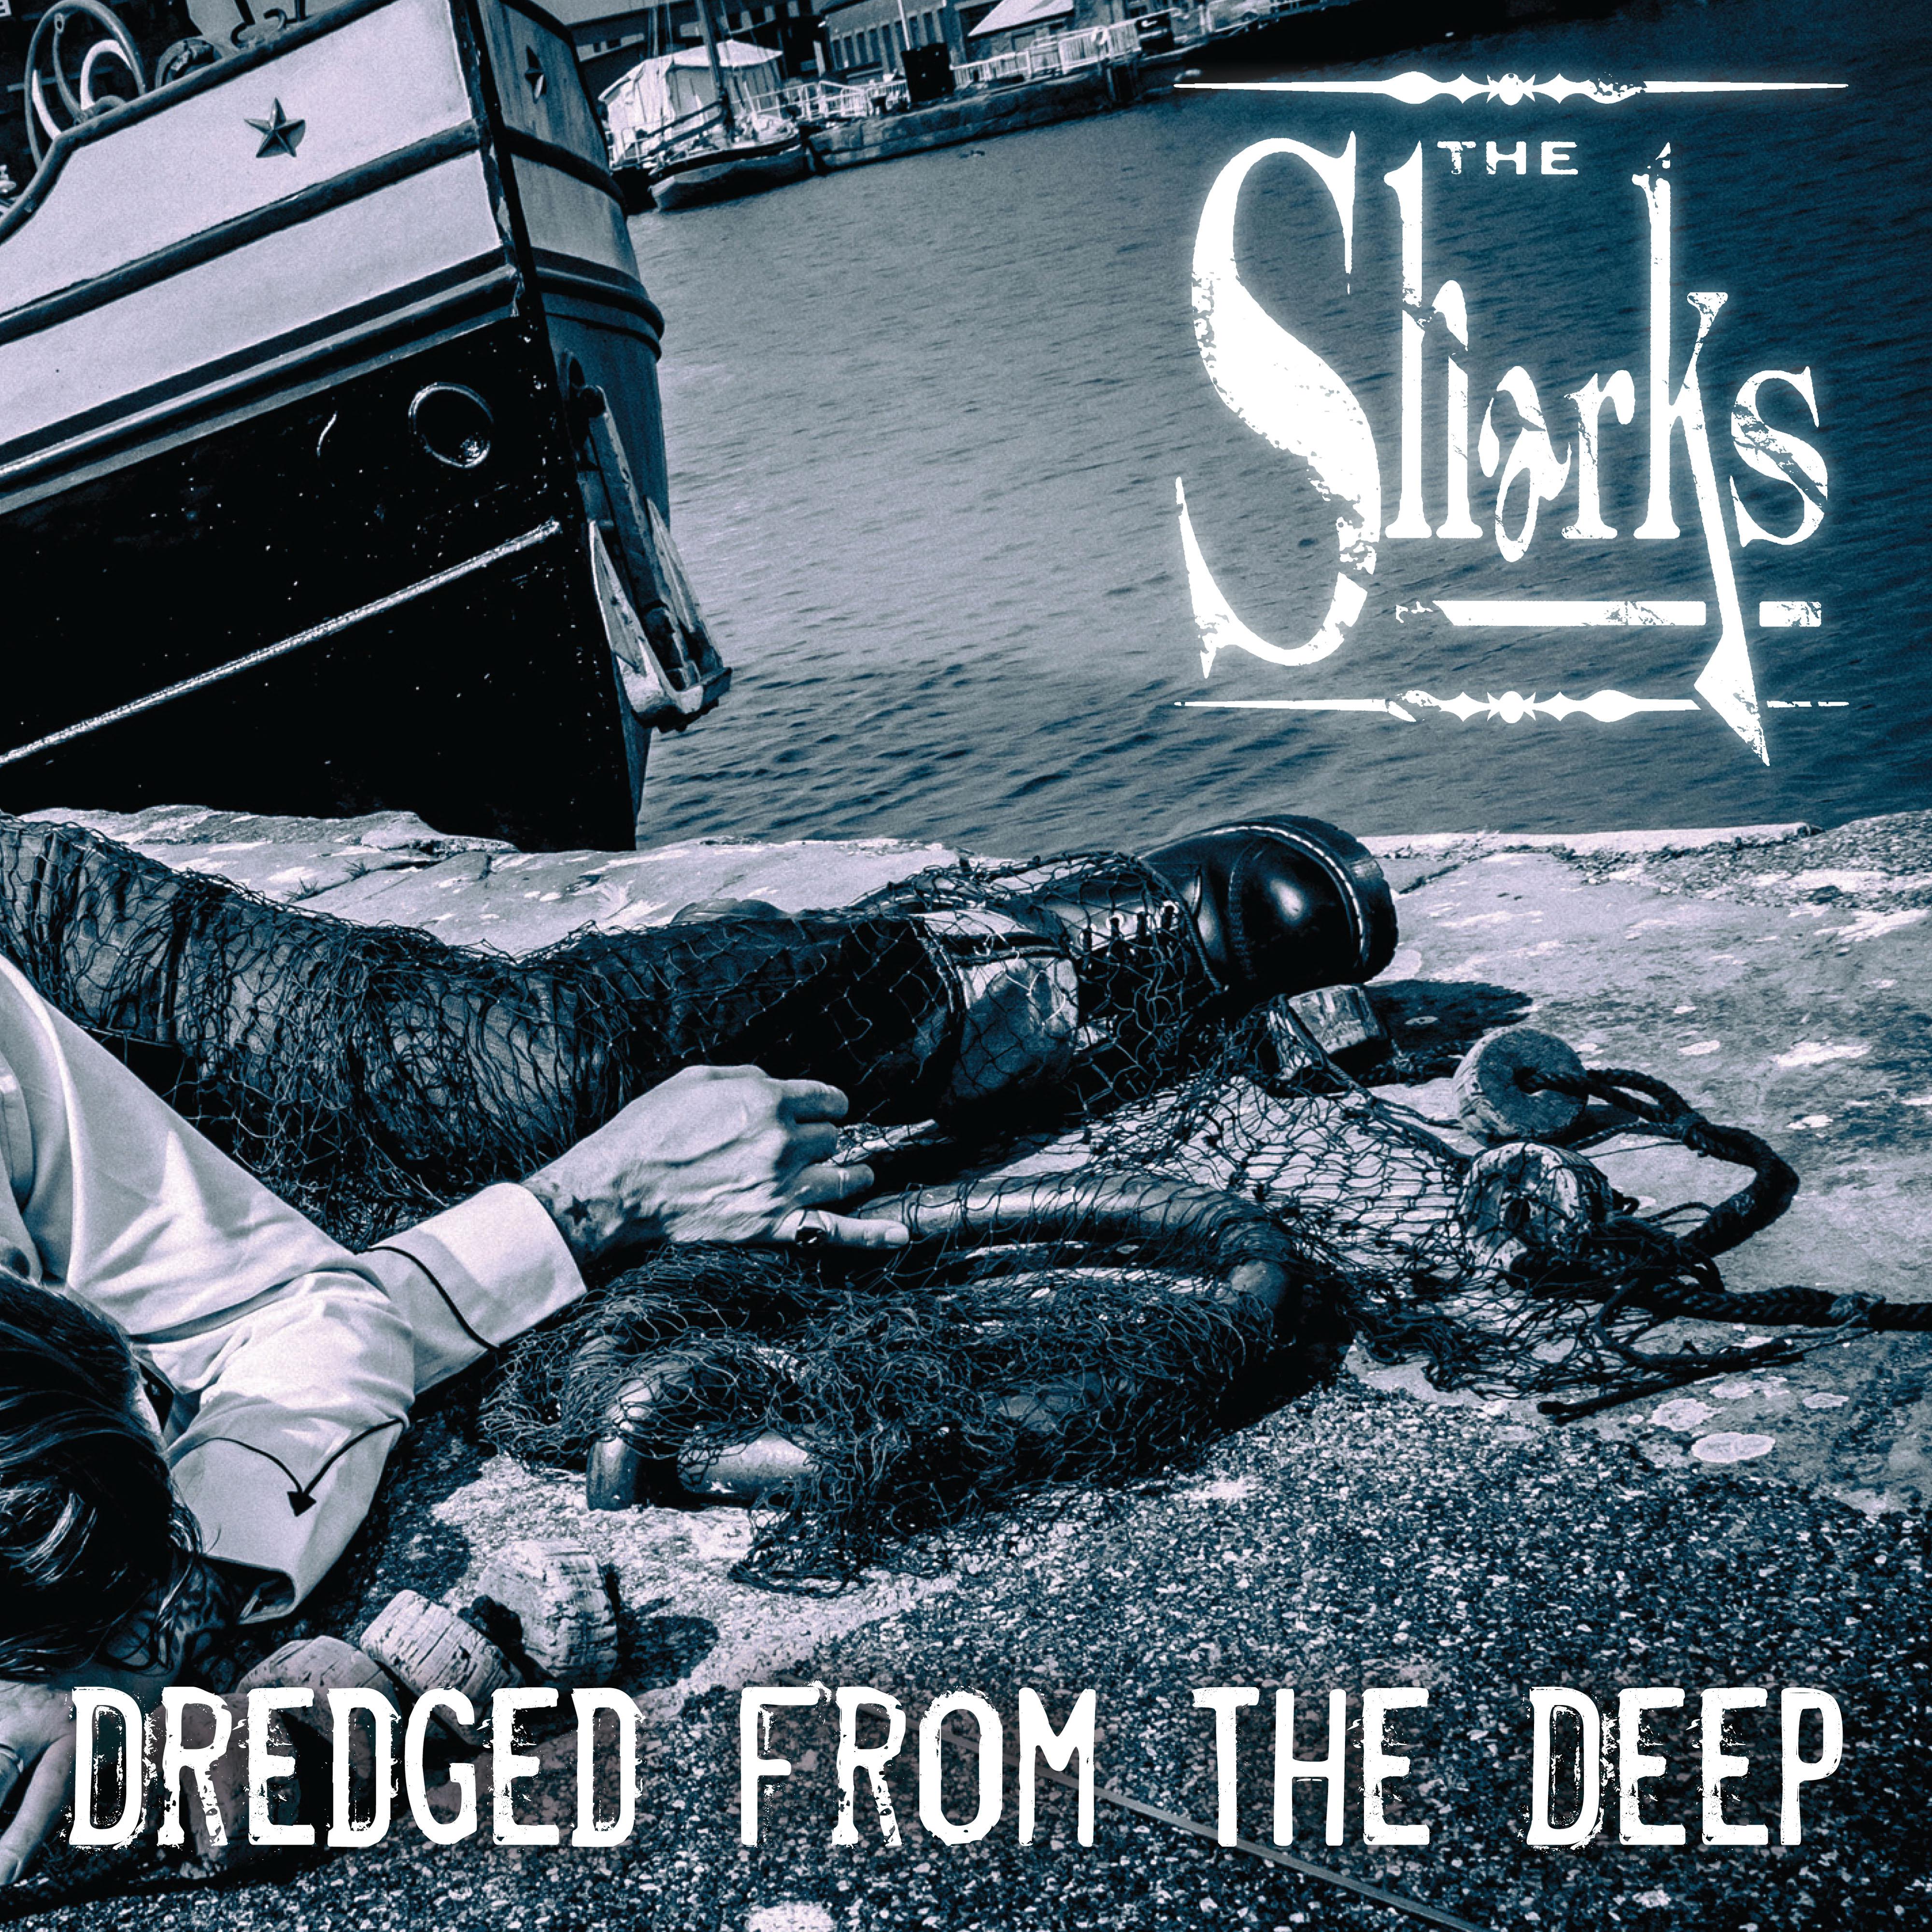 Dredged from the Deep